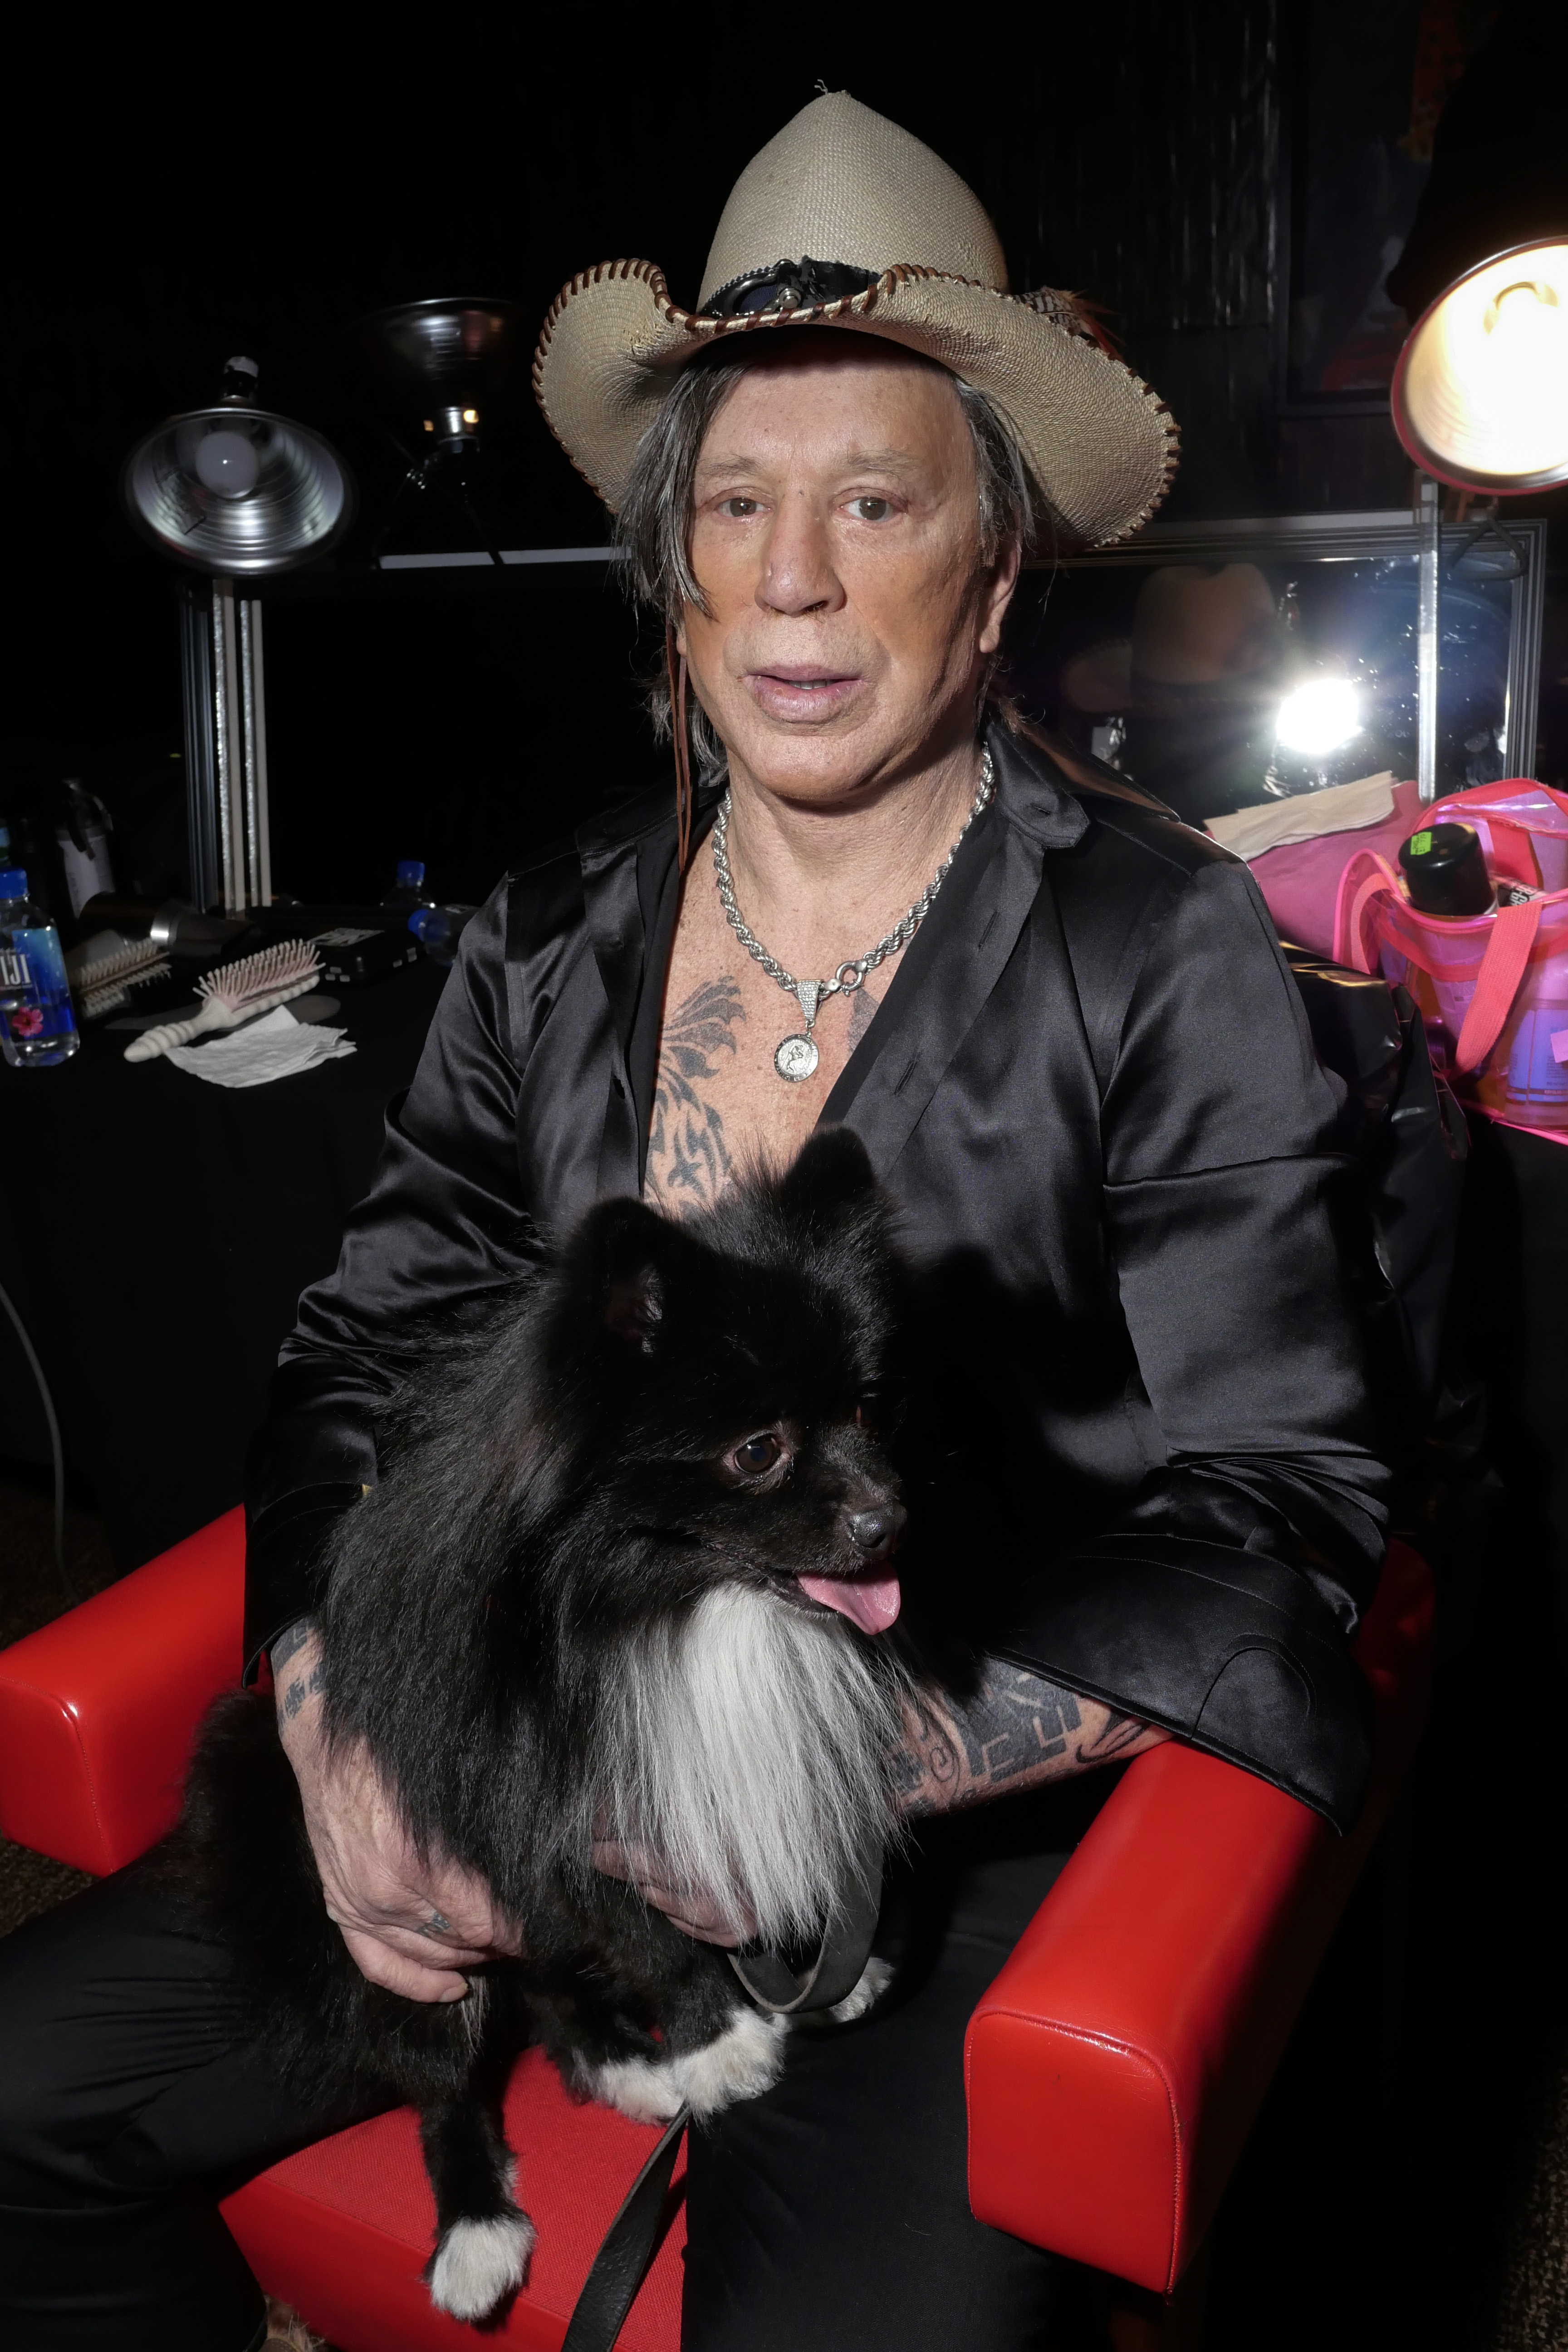 Mickey Rourke at the Philipp Plein and Billionaire show during New York Fashion Week on February 11, 2019 in New York. | Source: Getty Images